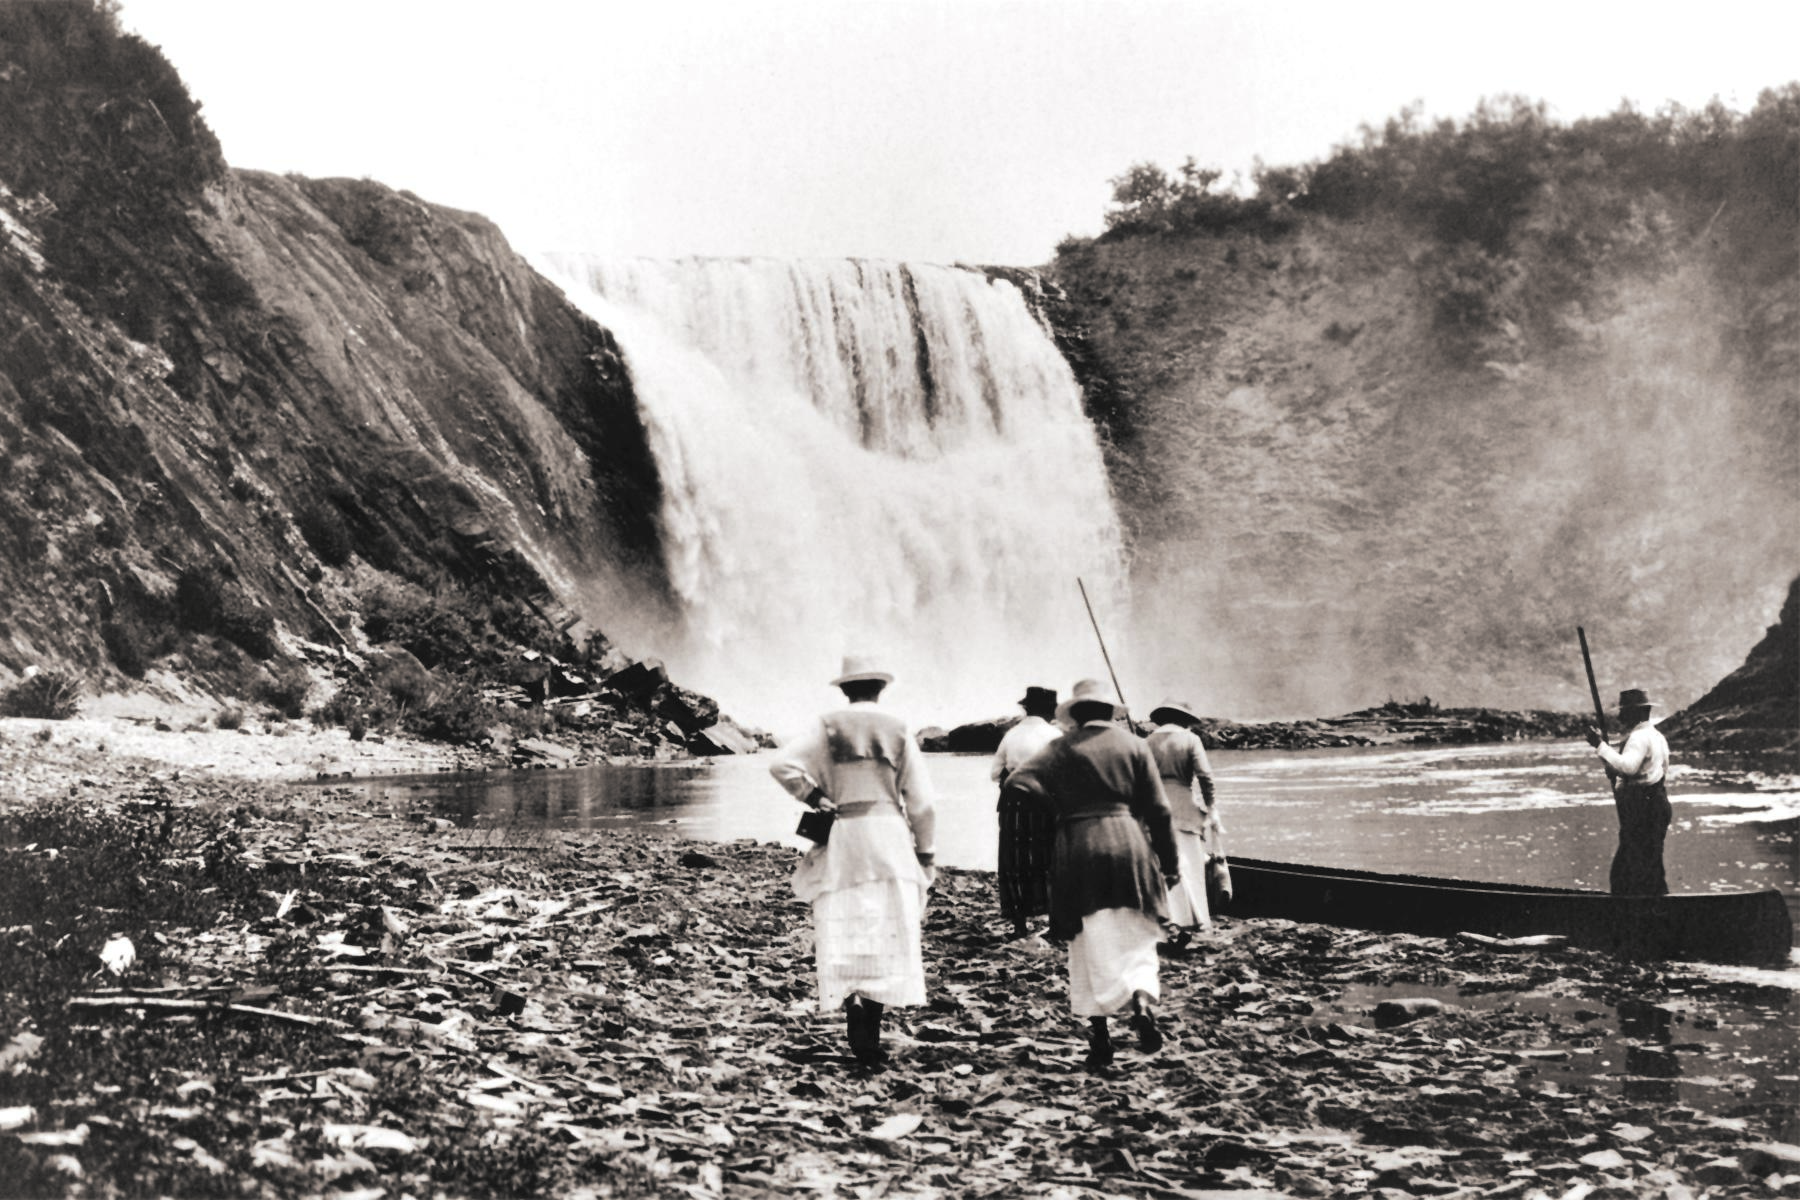 Four women walking at the foot of a waterfall, heading toward a guide standing in a canoe.